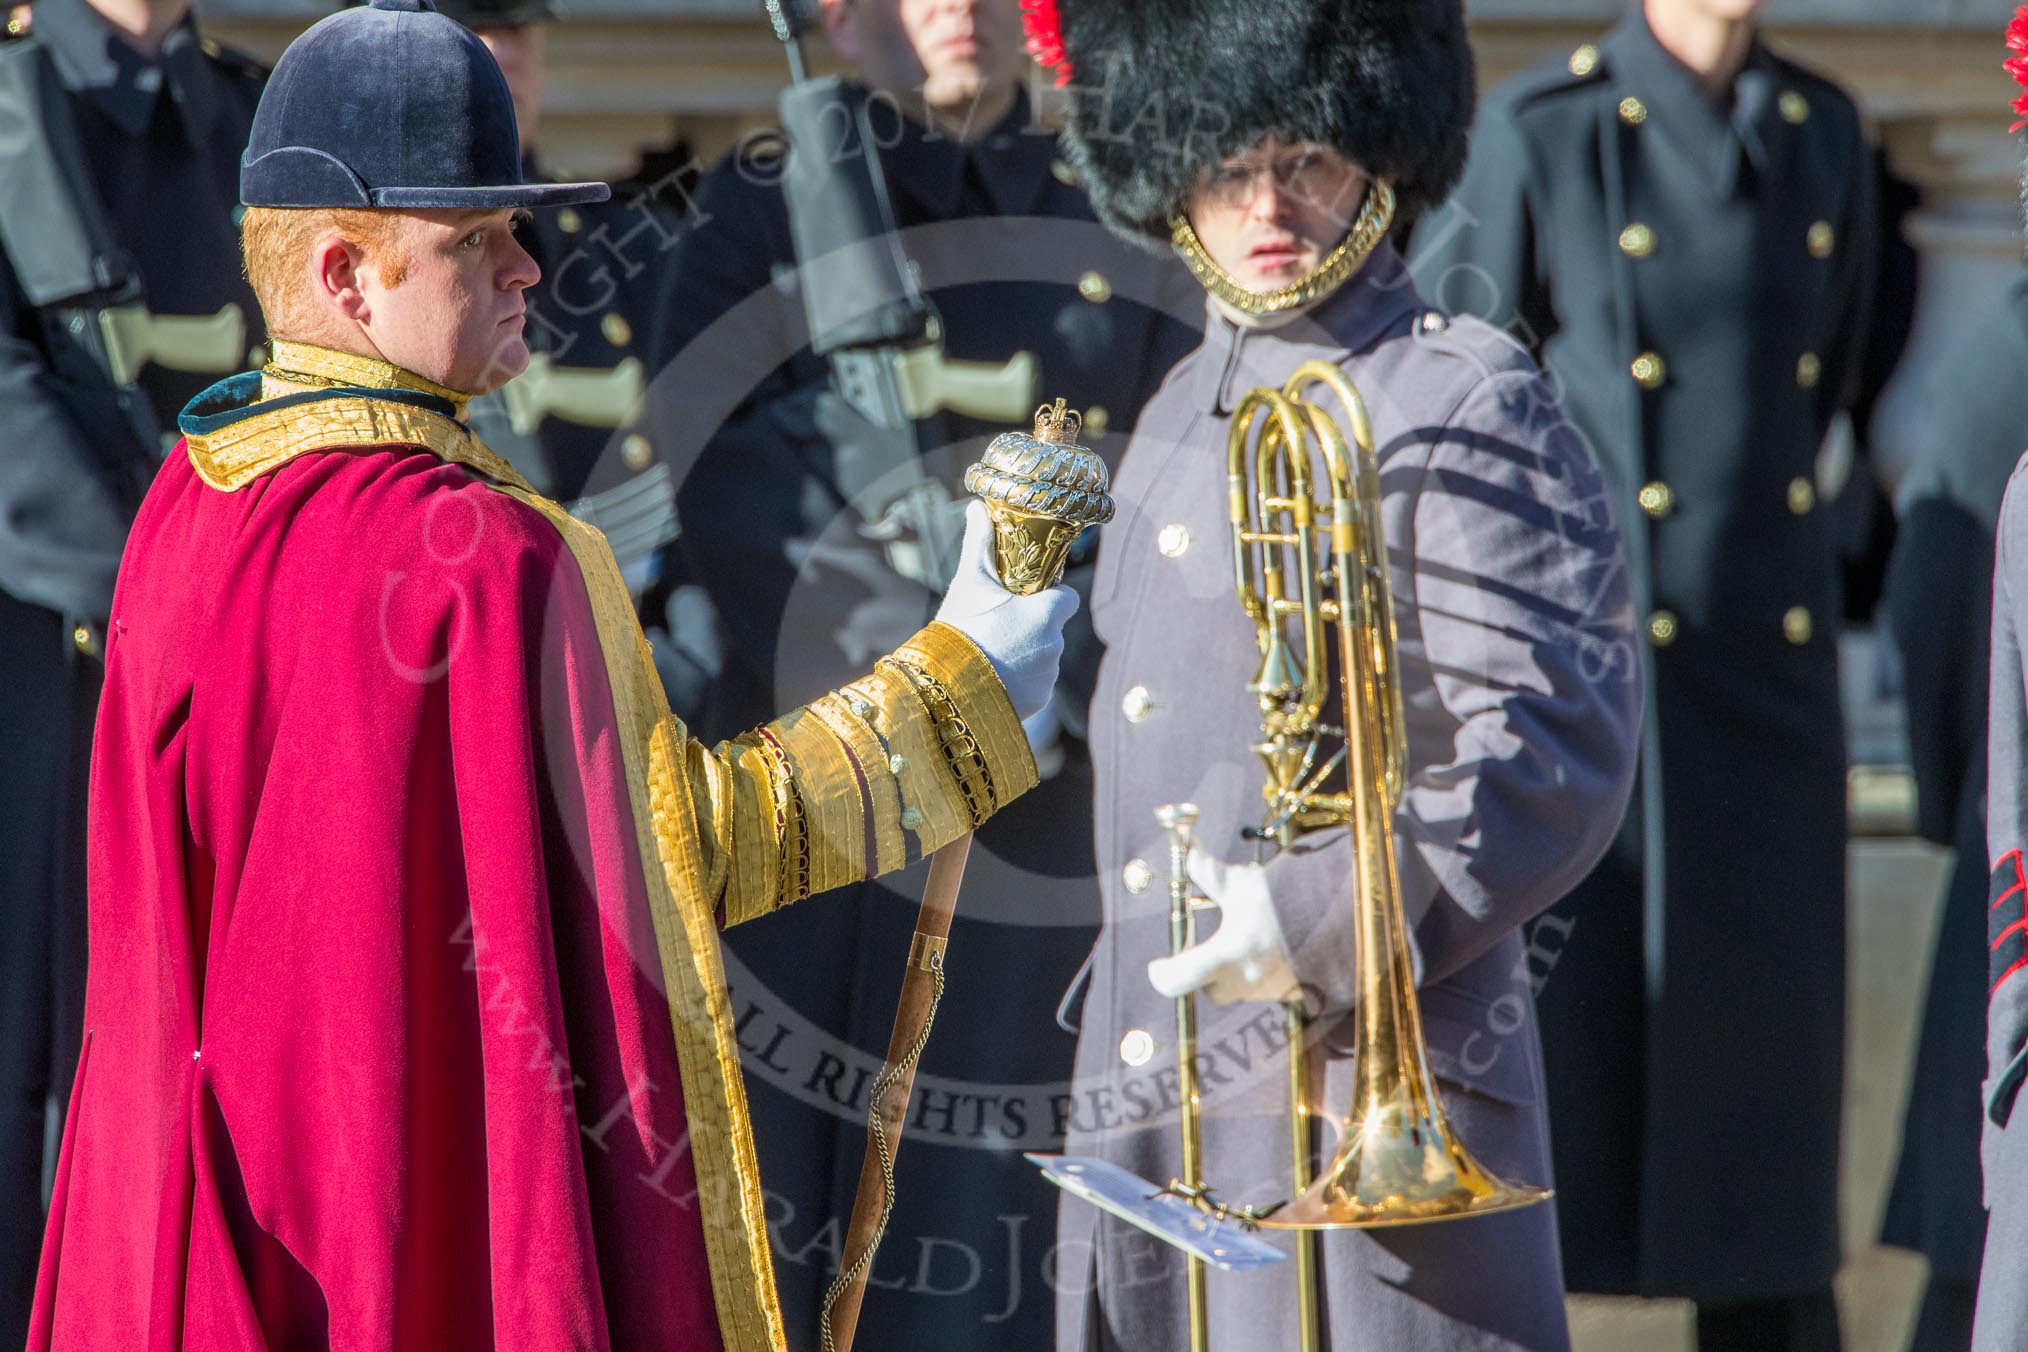 Drum Major Liam Rowley, Coldstream Guards during Remembrance Sunday Cenotaph Ceremony 2018 at Horse Guards Parade, Westminster, London, 11 November 2018, 11:33.